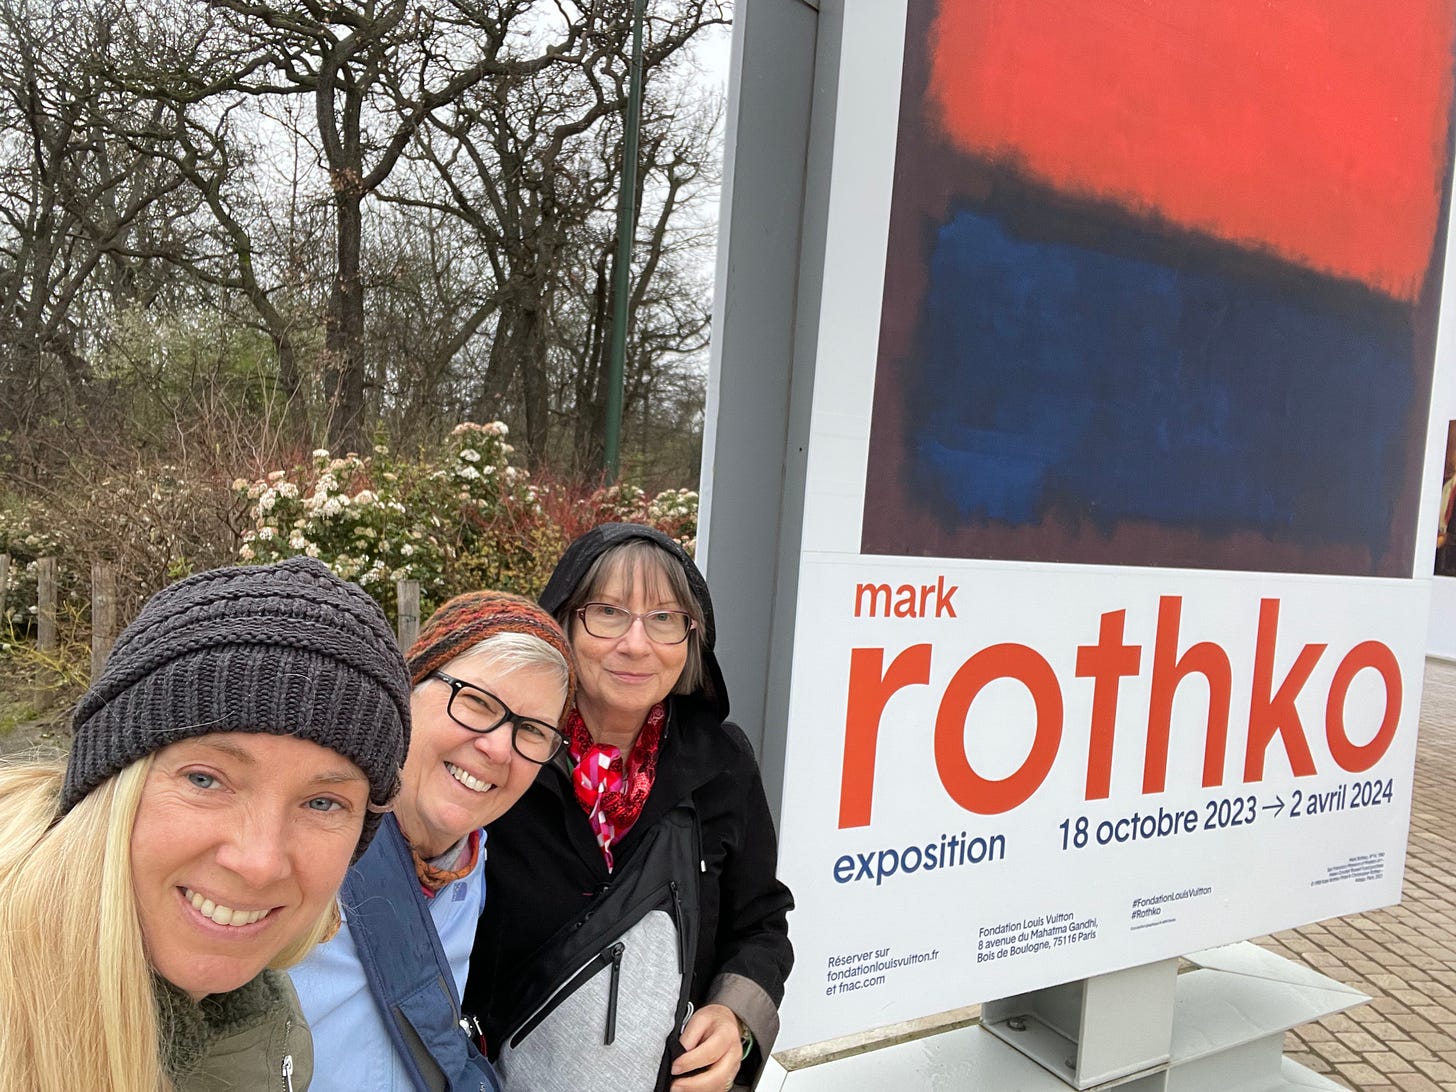 My moms and me at the Rothko exhibit in Paris